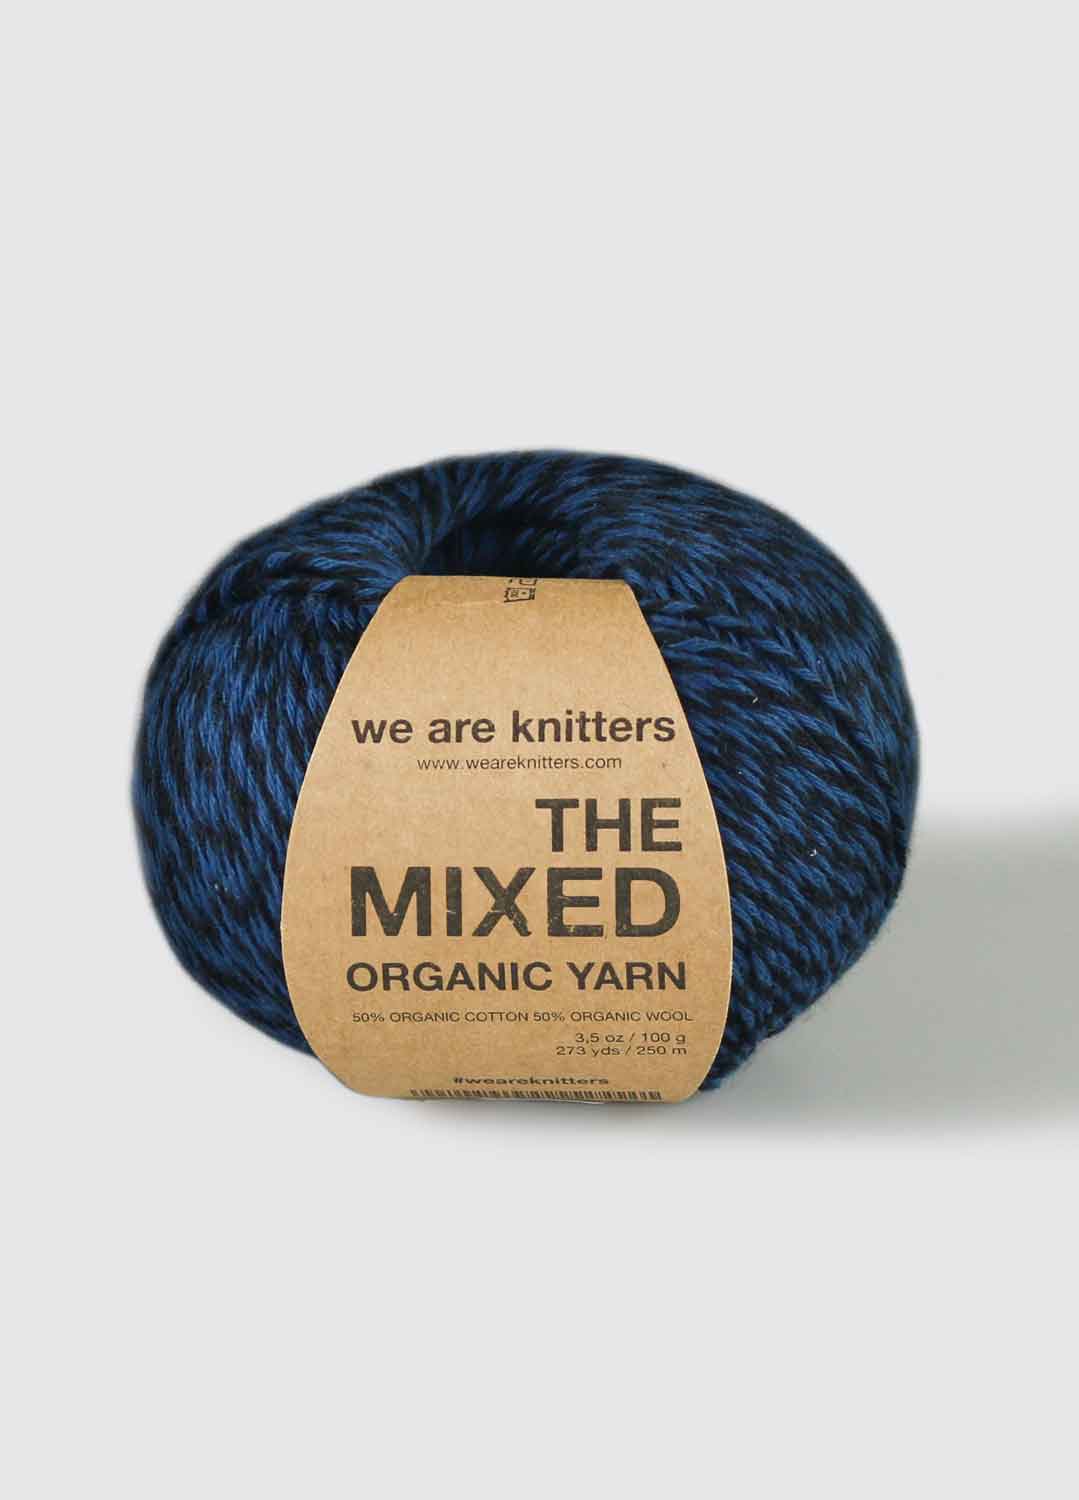  50g Blue Yarn For Crocheting And Knitting;80M